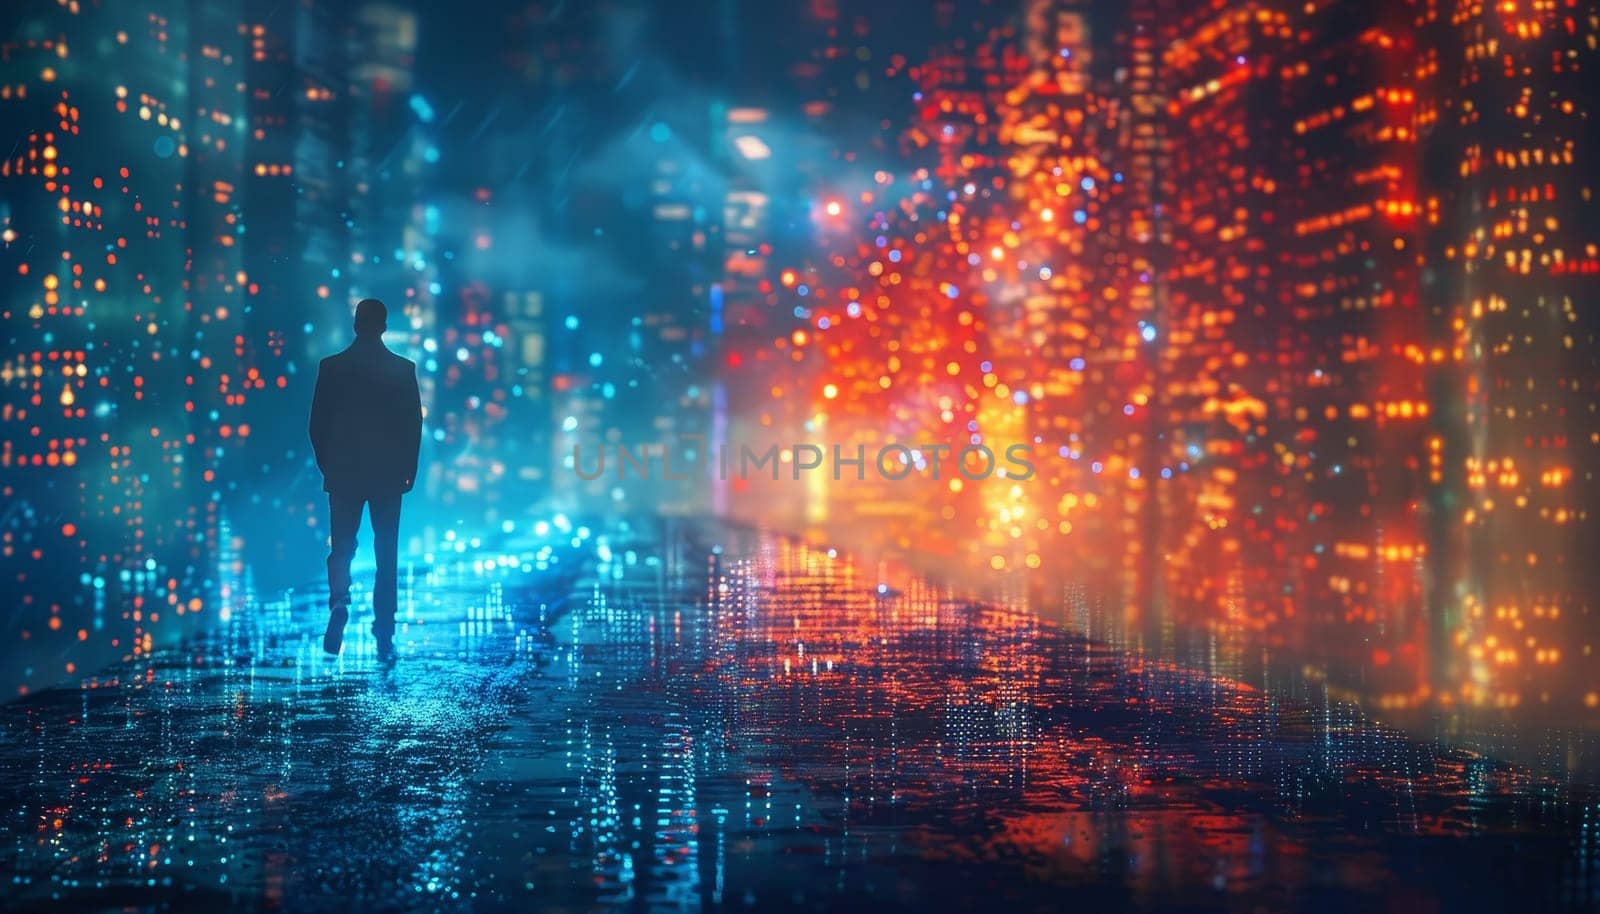 A man is walking down a street in a city at night by AI generated image.